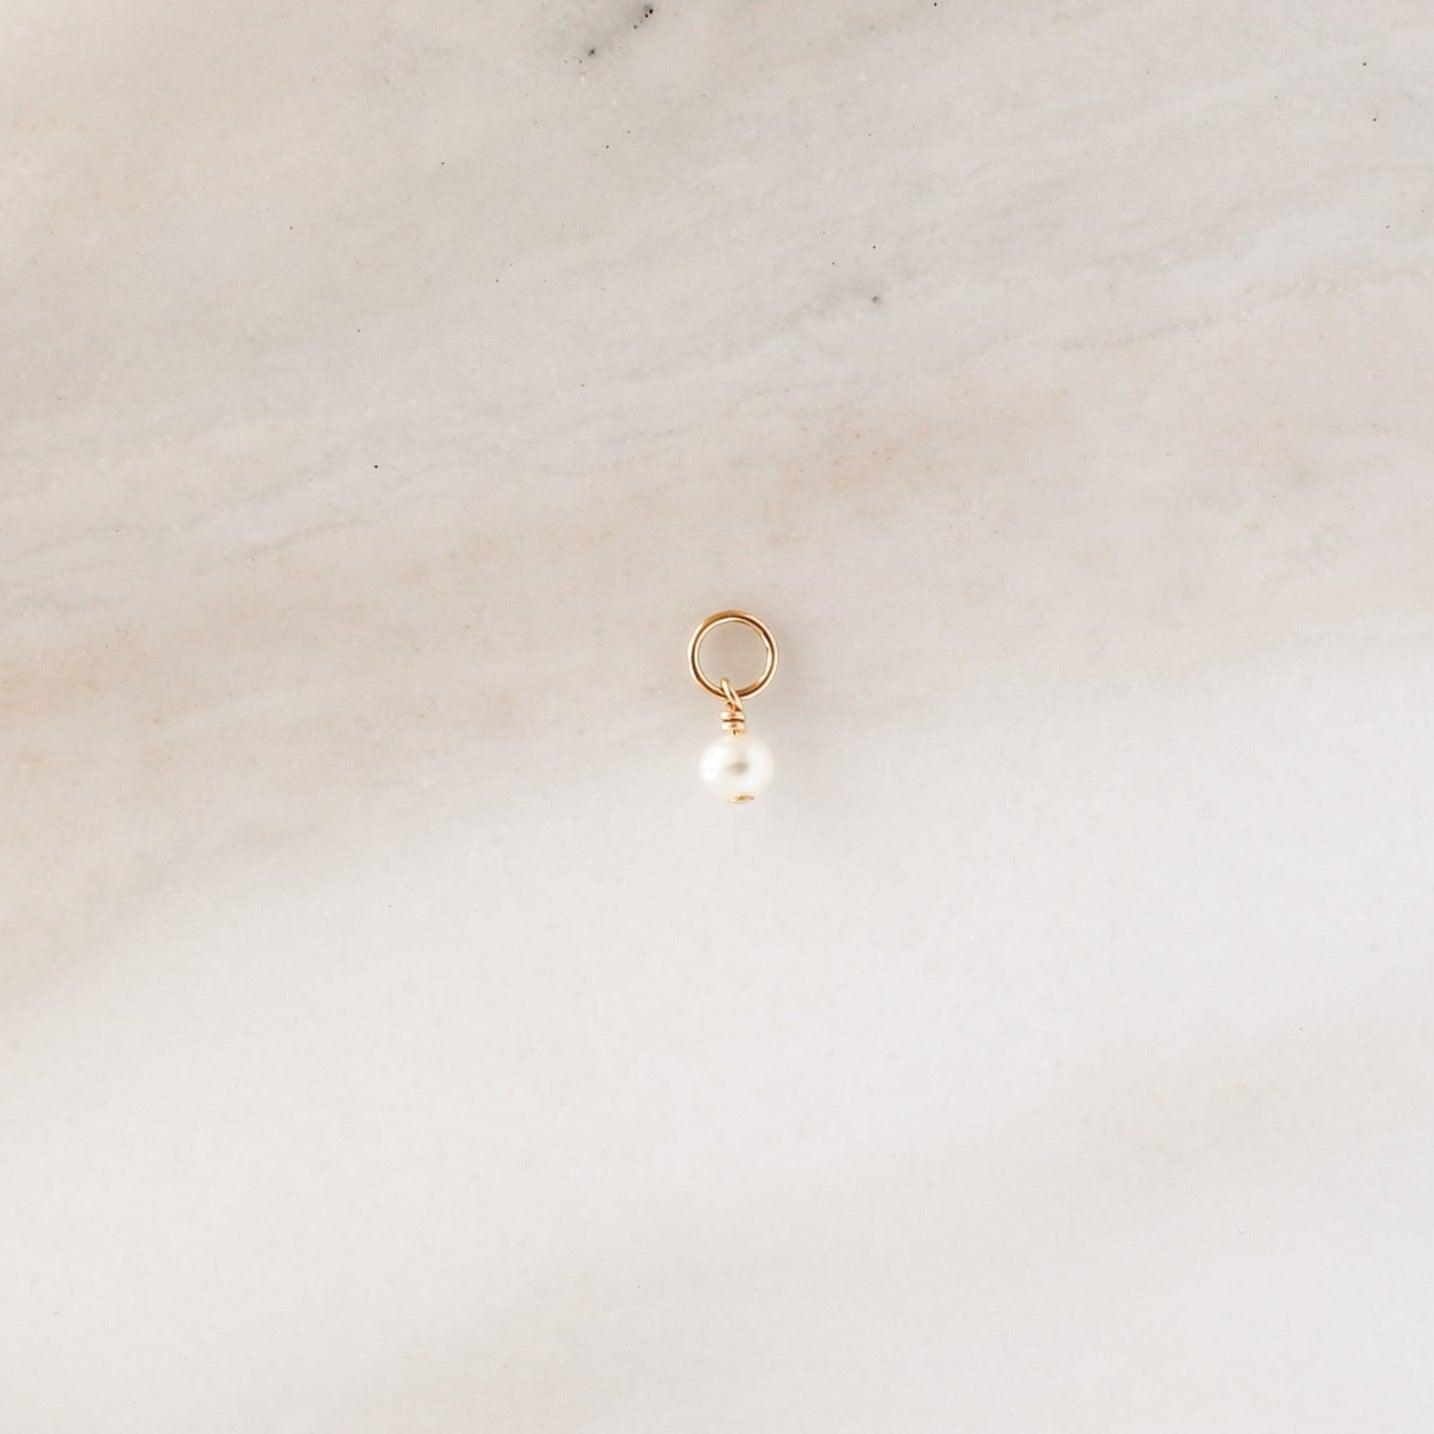 Tiny Margo Pearl Charm • Add On - Nolia Jewelry - Meaningful + Sustainably Handcrafted Jewelry